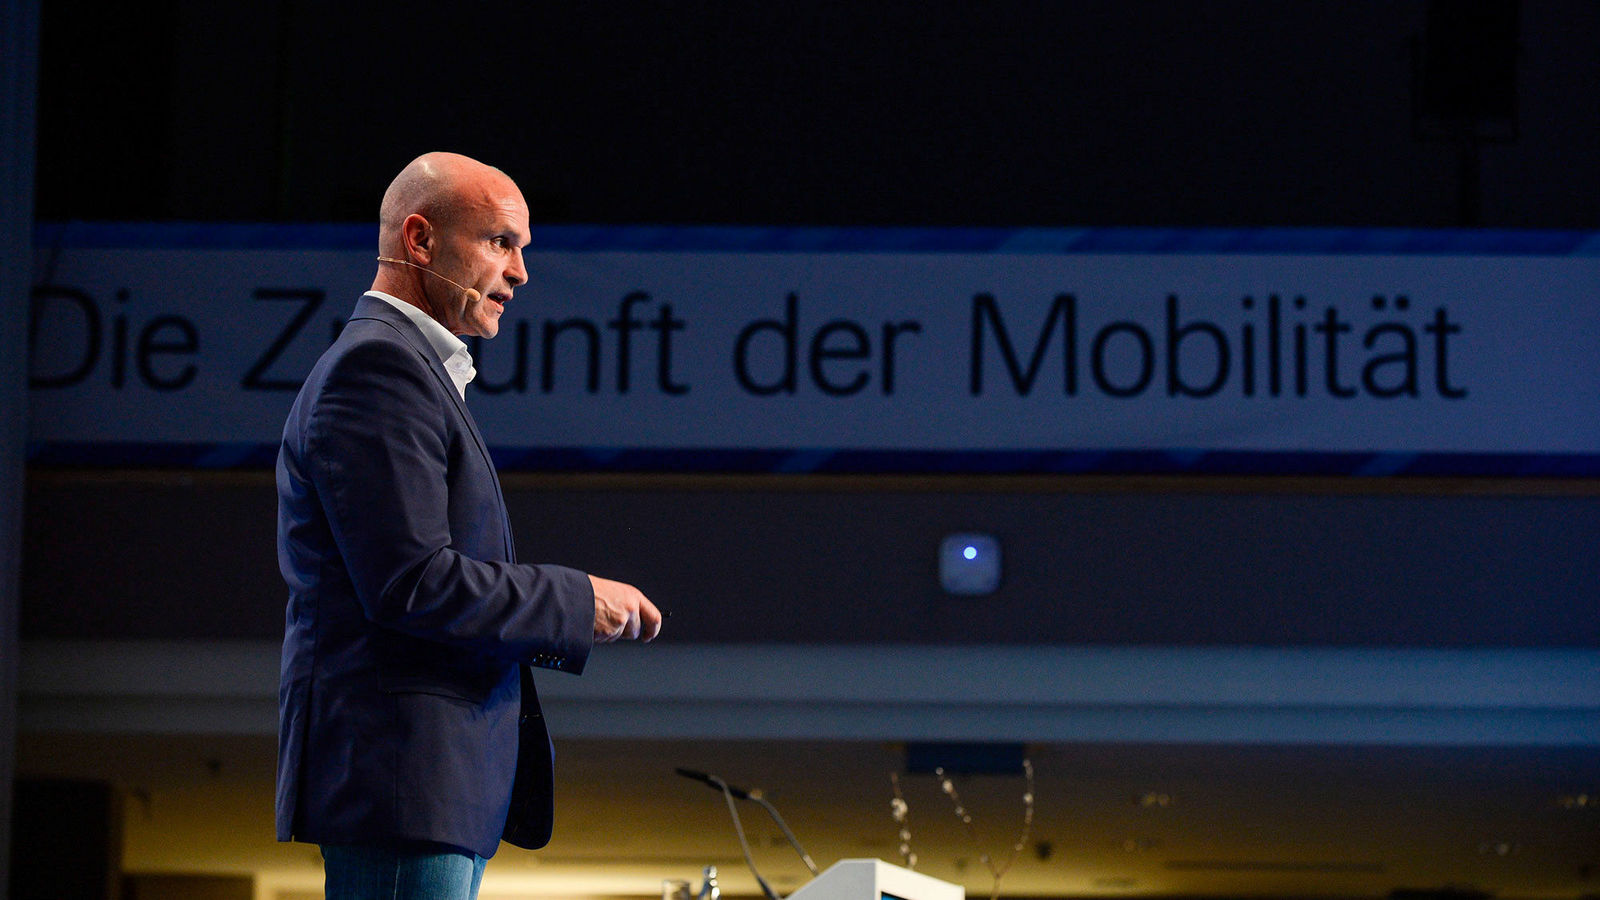 Thomas Ulbrich, Member of the Board of Management of the Volkswagen Brand responsible for E-Mobility